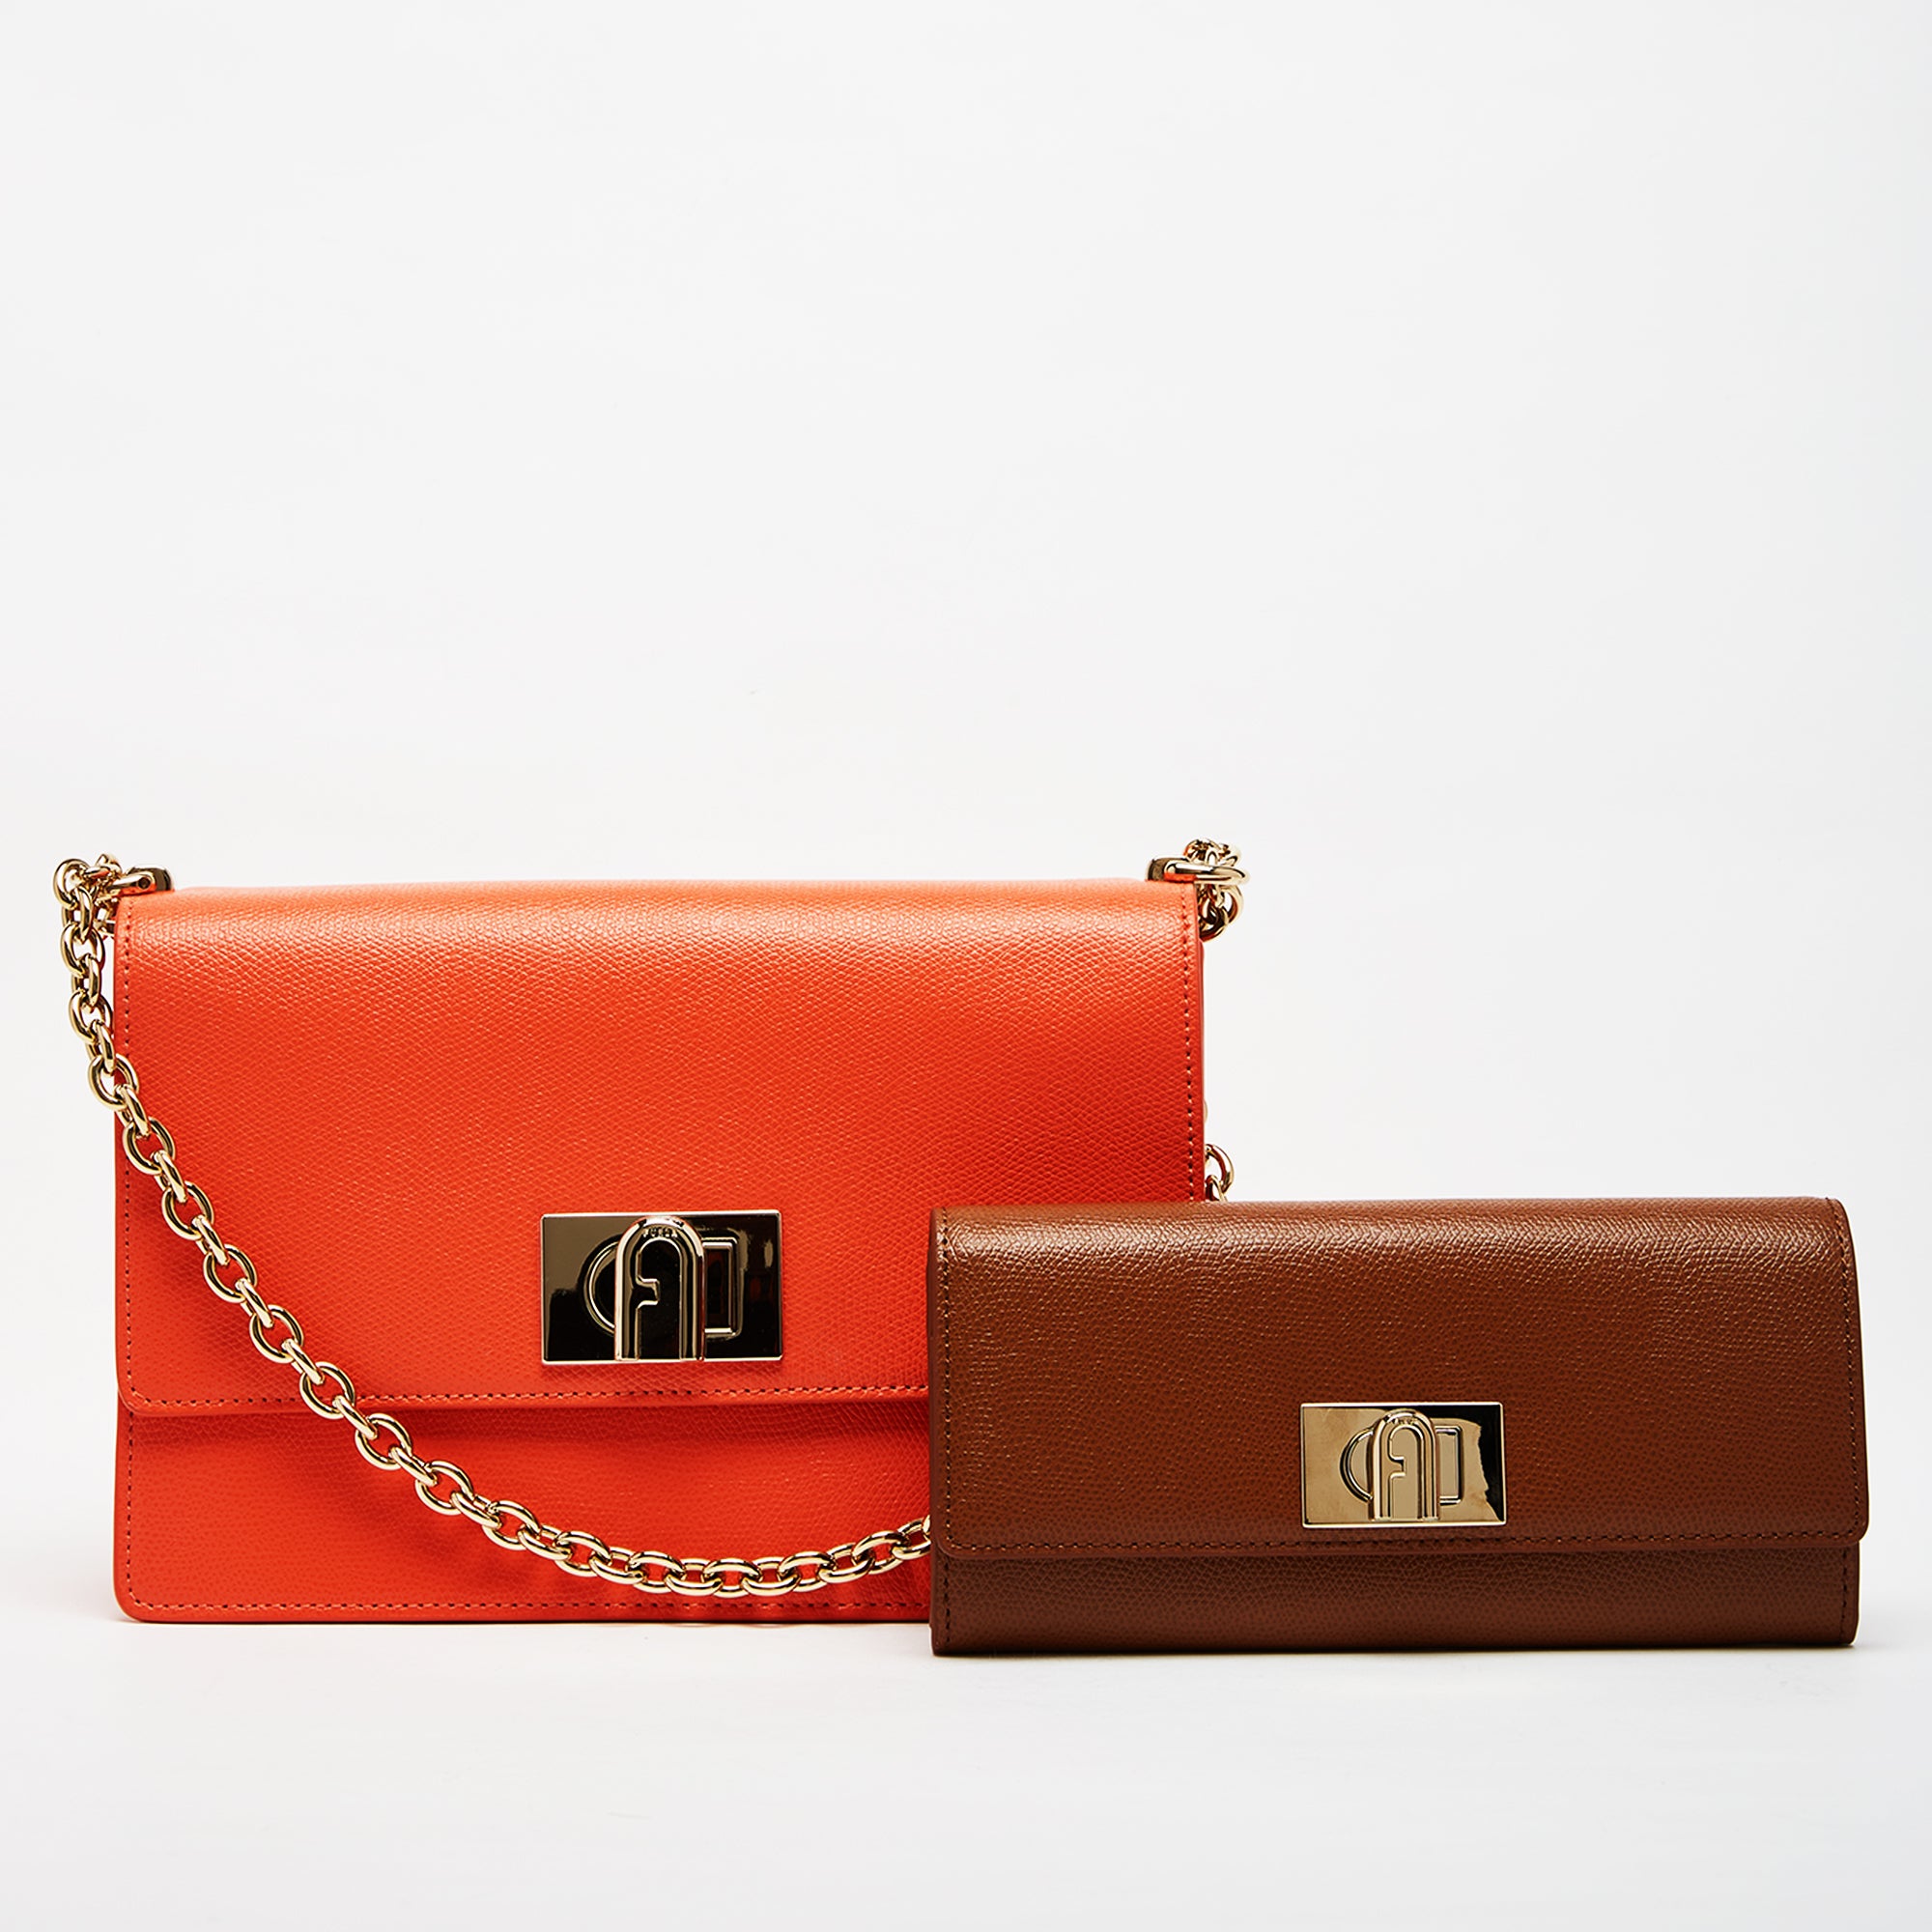 Furla 1927 Crossbody Bag with Continental Wallet Combo Clivia Cognac H S One Size